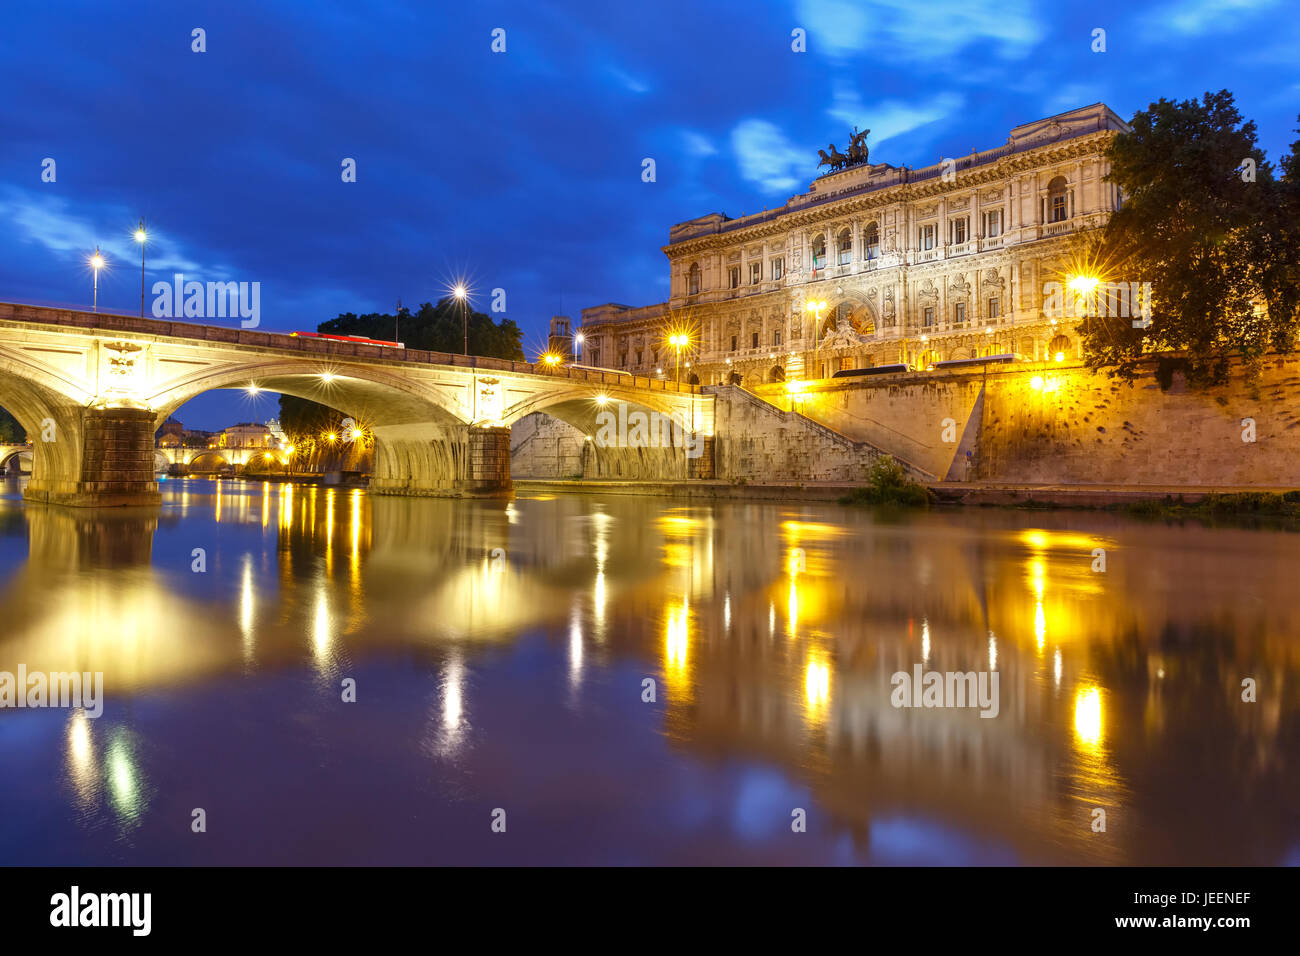 The Palace of Justice in Rome, Italy Stock Photo